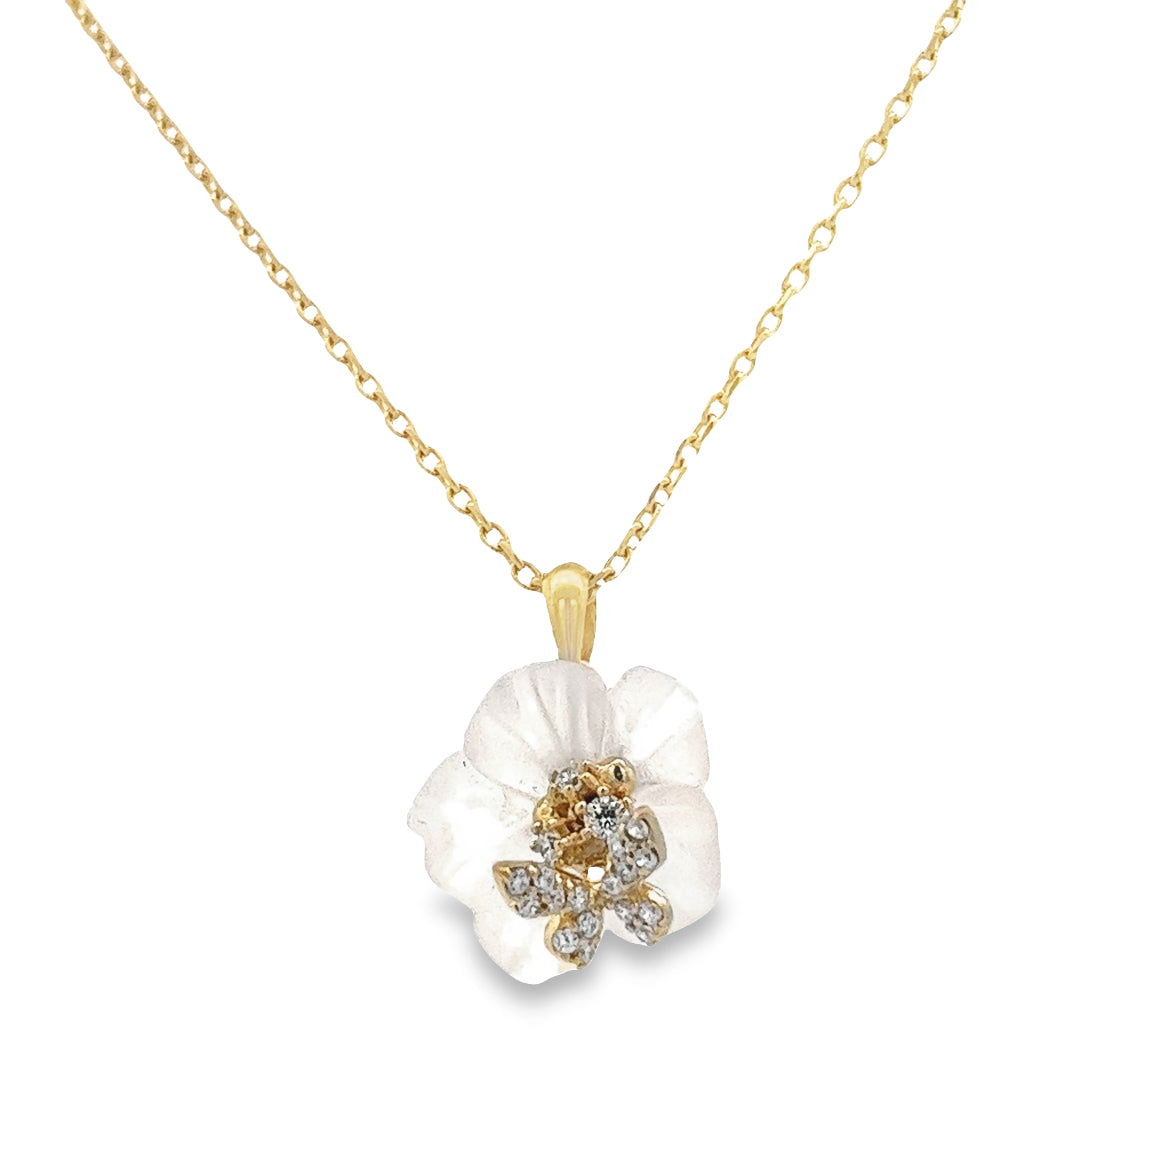 925 SILVER GOLD PLATED NECKLACE PENDANT FLOWER